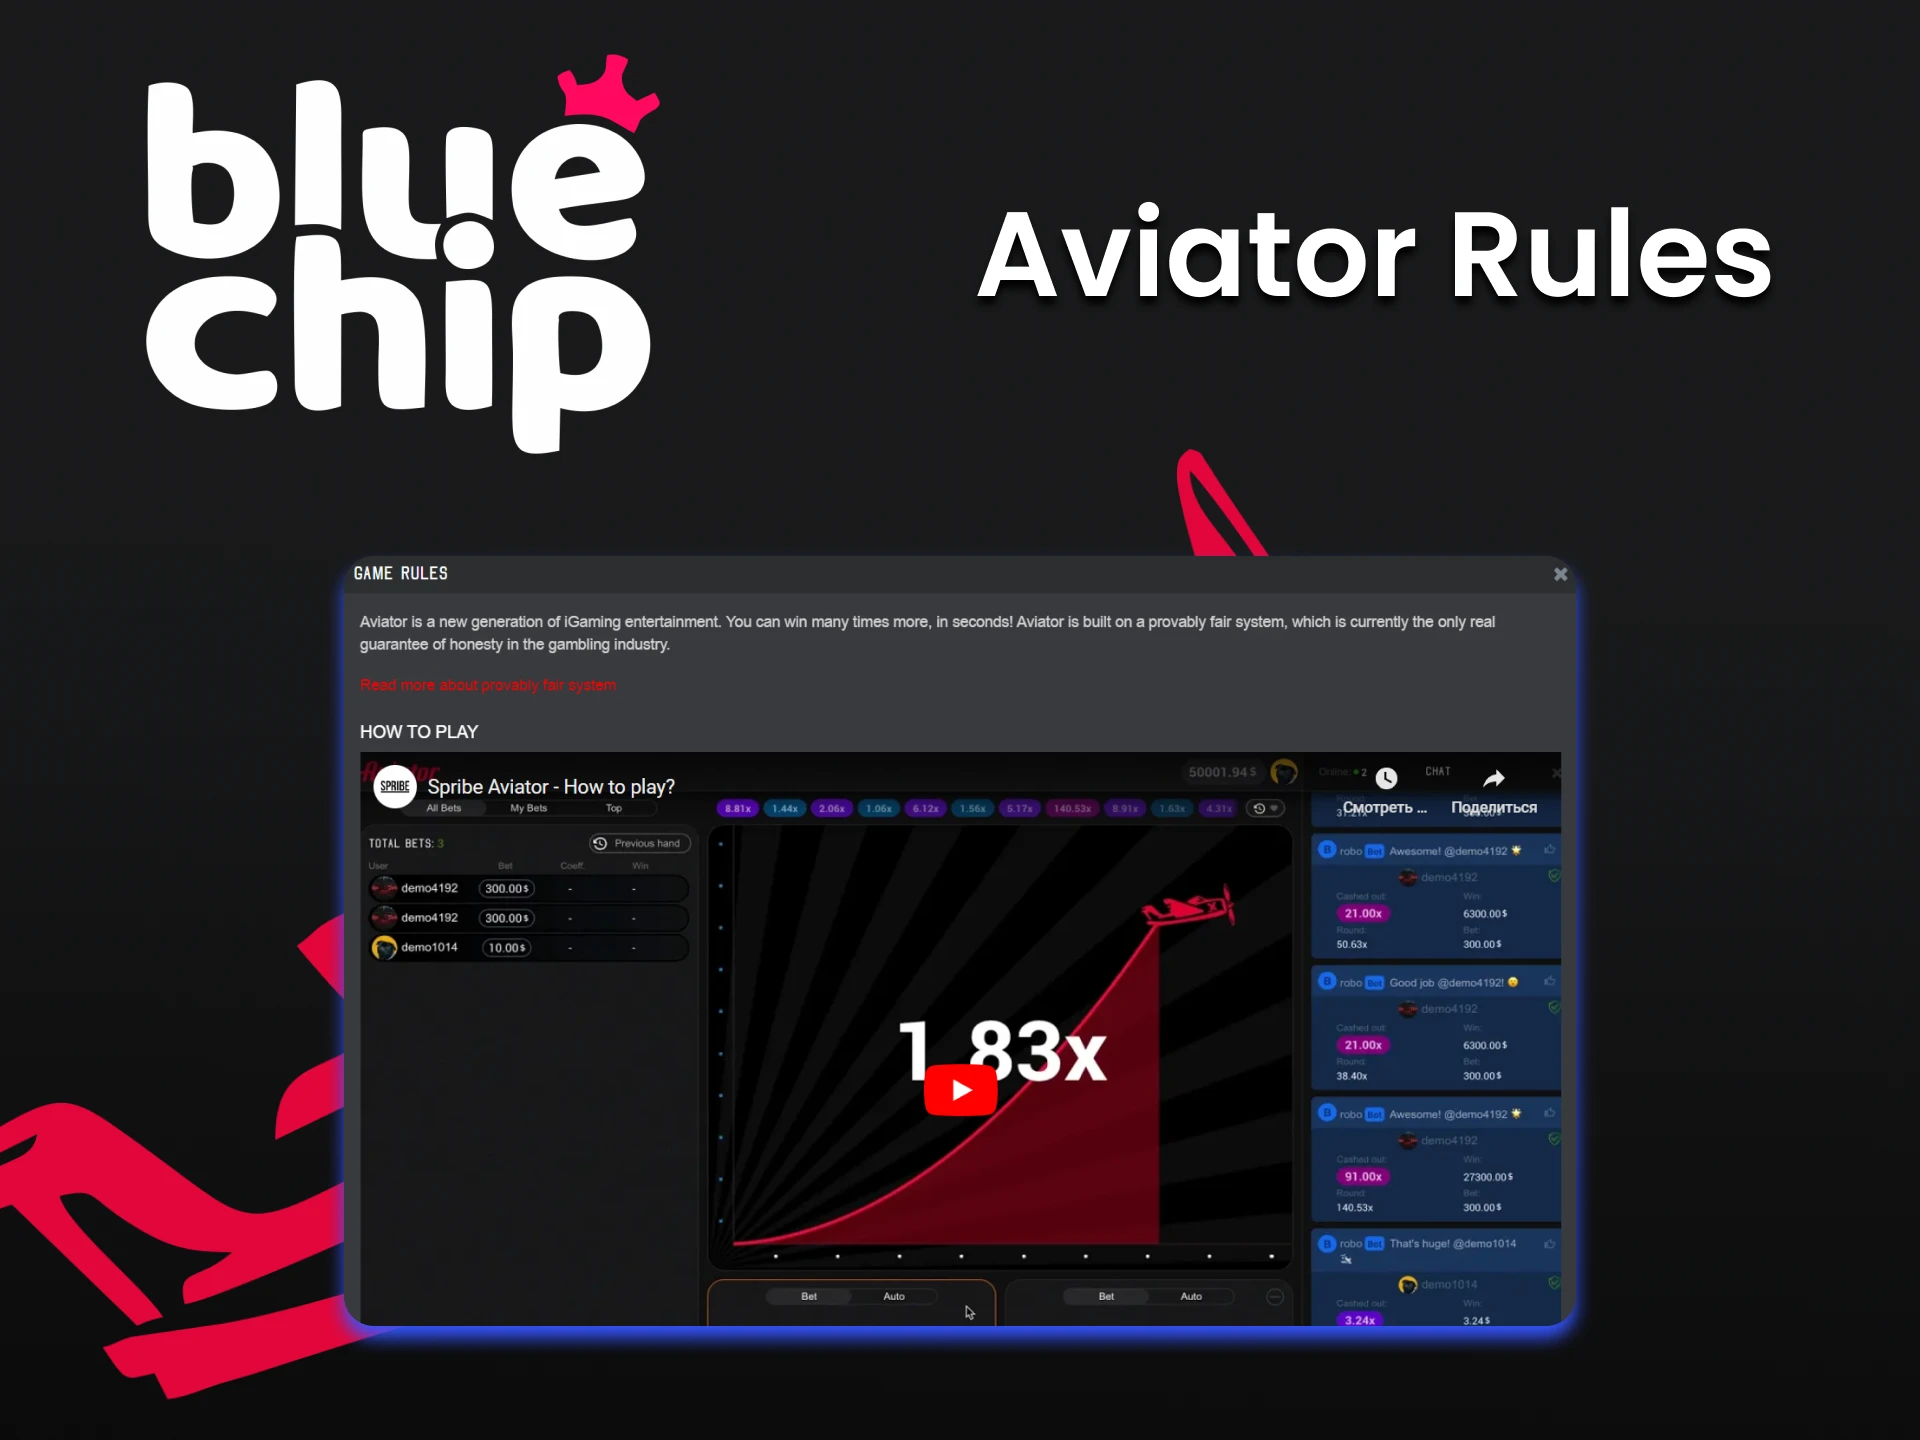 Like all games, BlueChip's Aviator has its own rules.